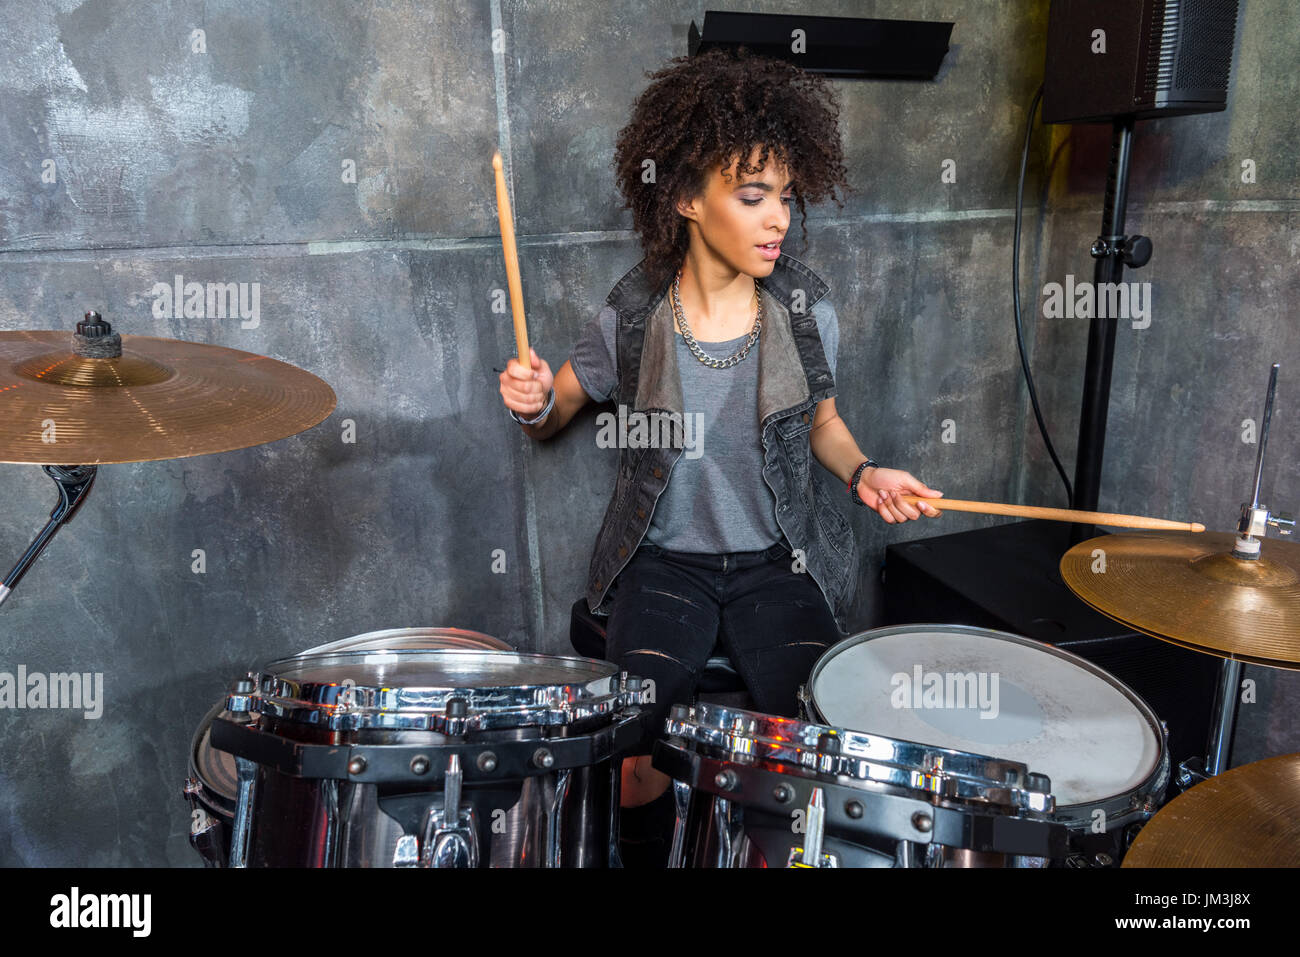 young woman playing drums in musical studio, drummer rock concept Stock Photo